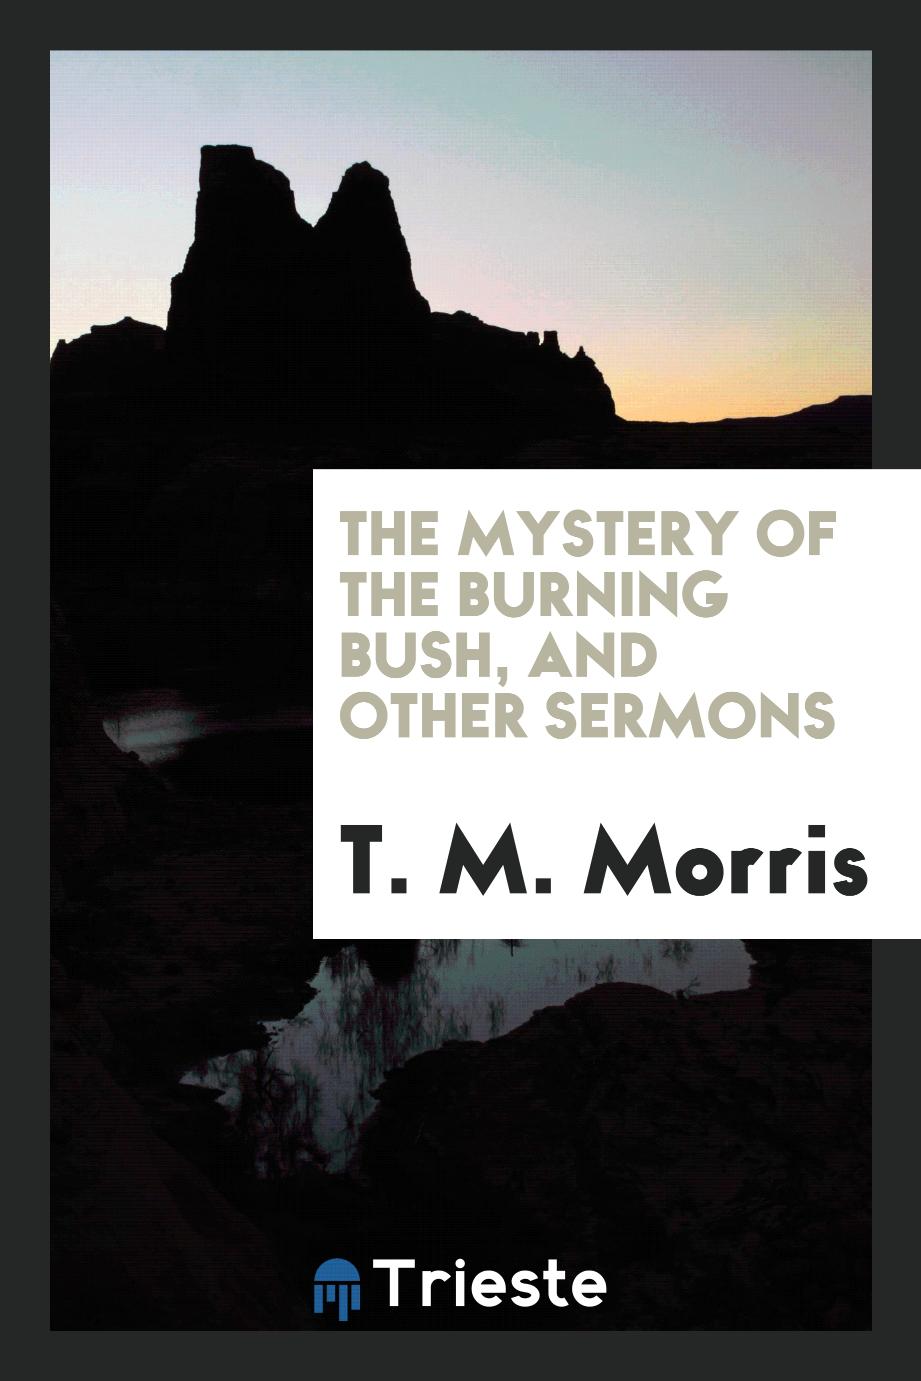 The Mystery of the Burning Bush, and Other Sermons